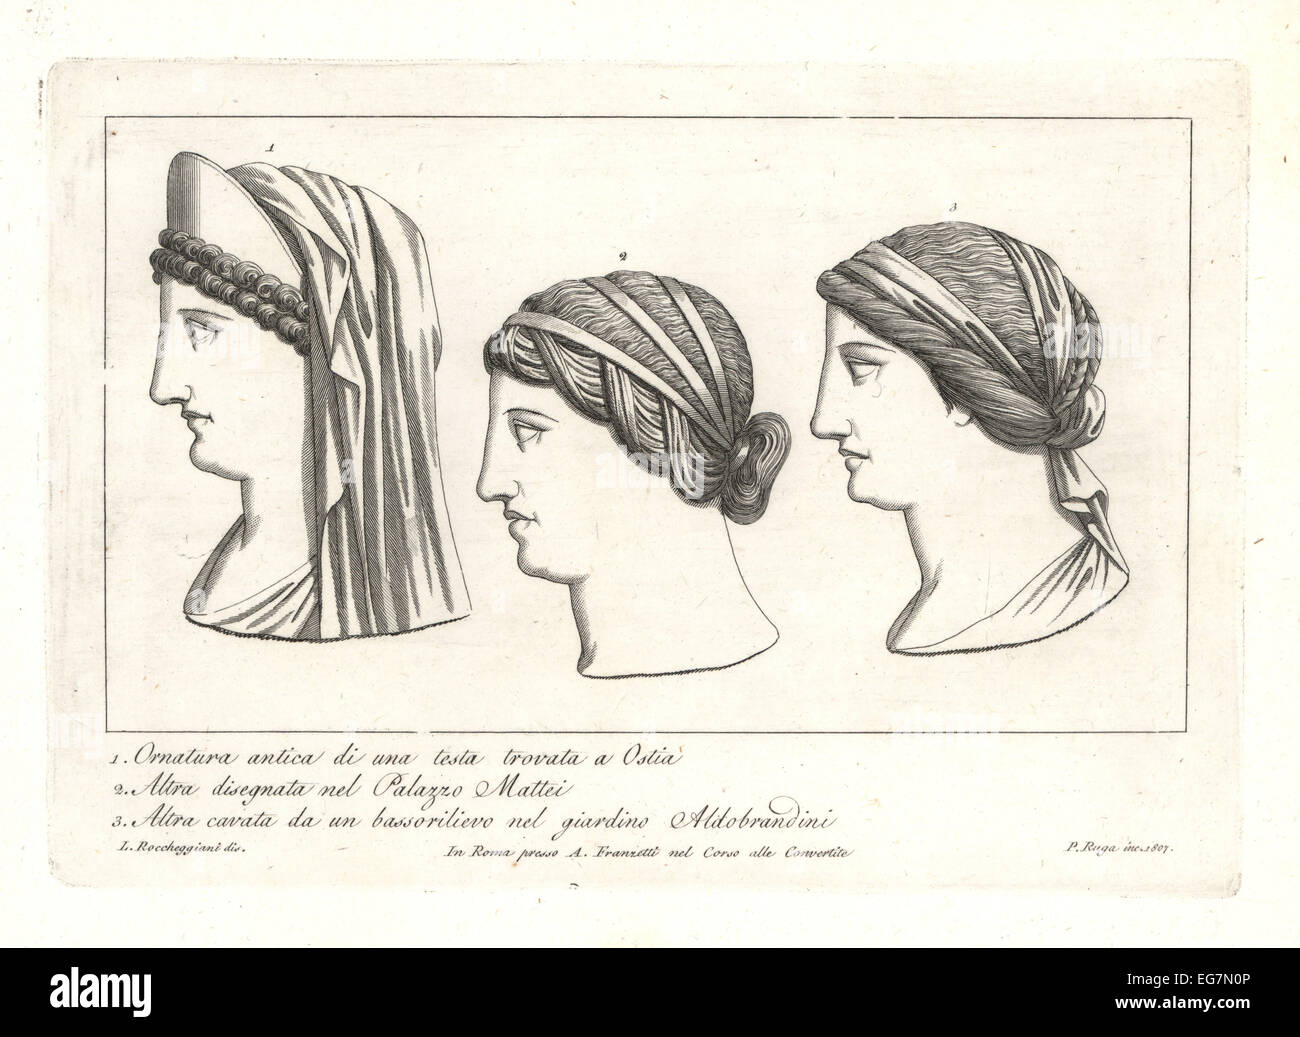 Ancient Hairstyles of the GrecoRoman World  World History et cetera